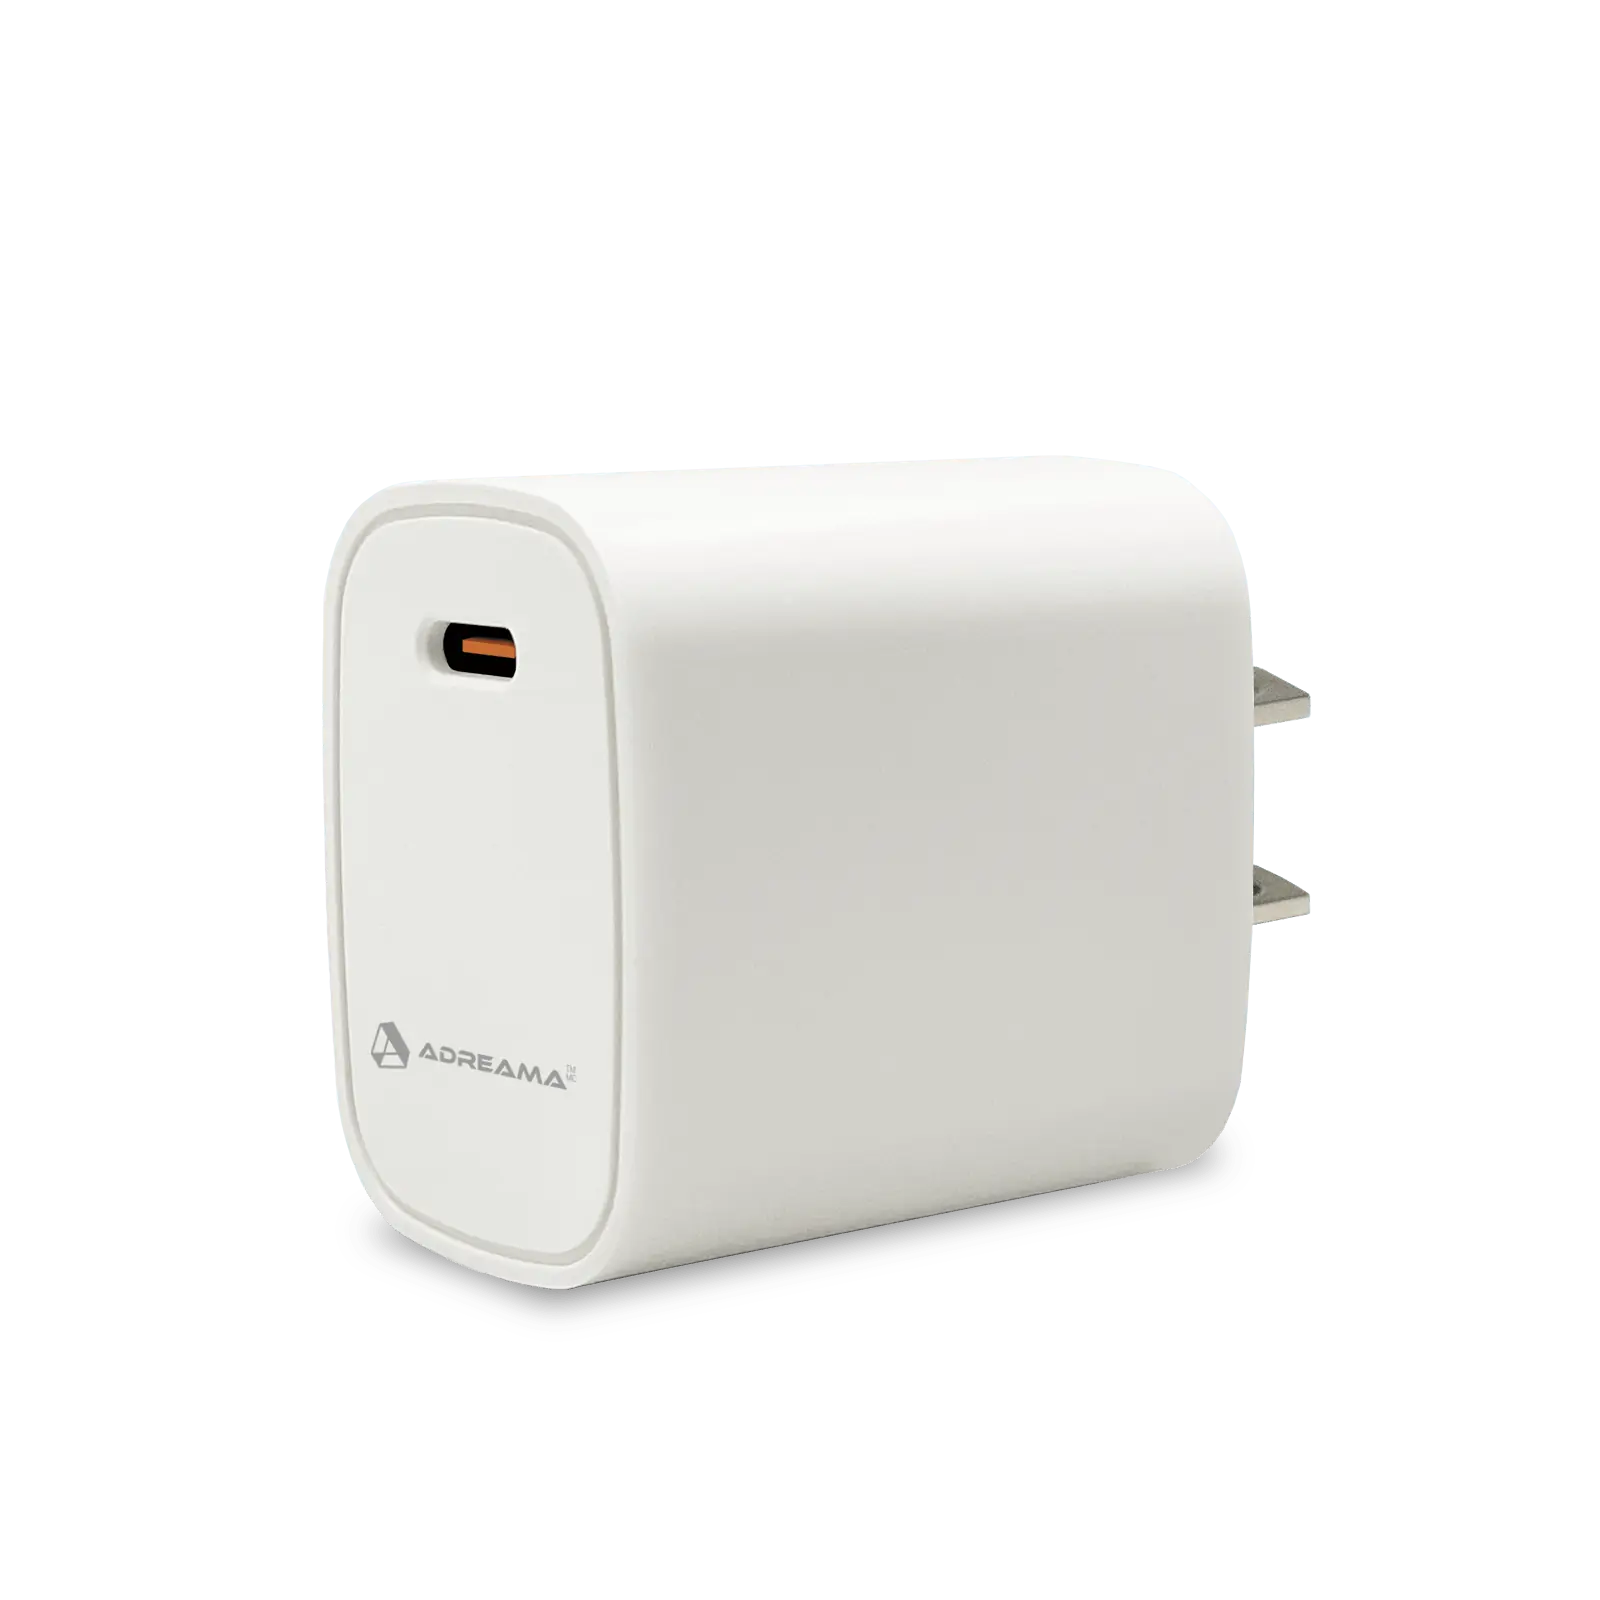 Simplify Your Charging Routine with the Adreama PD 20W Wall Charger